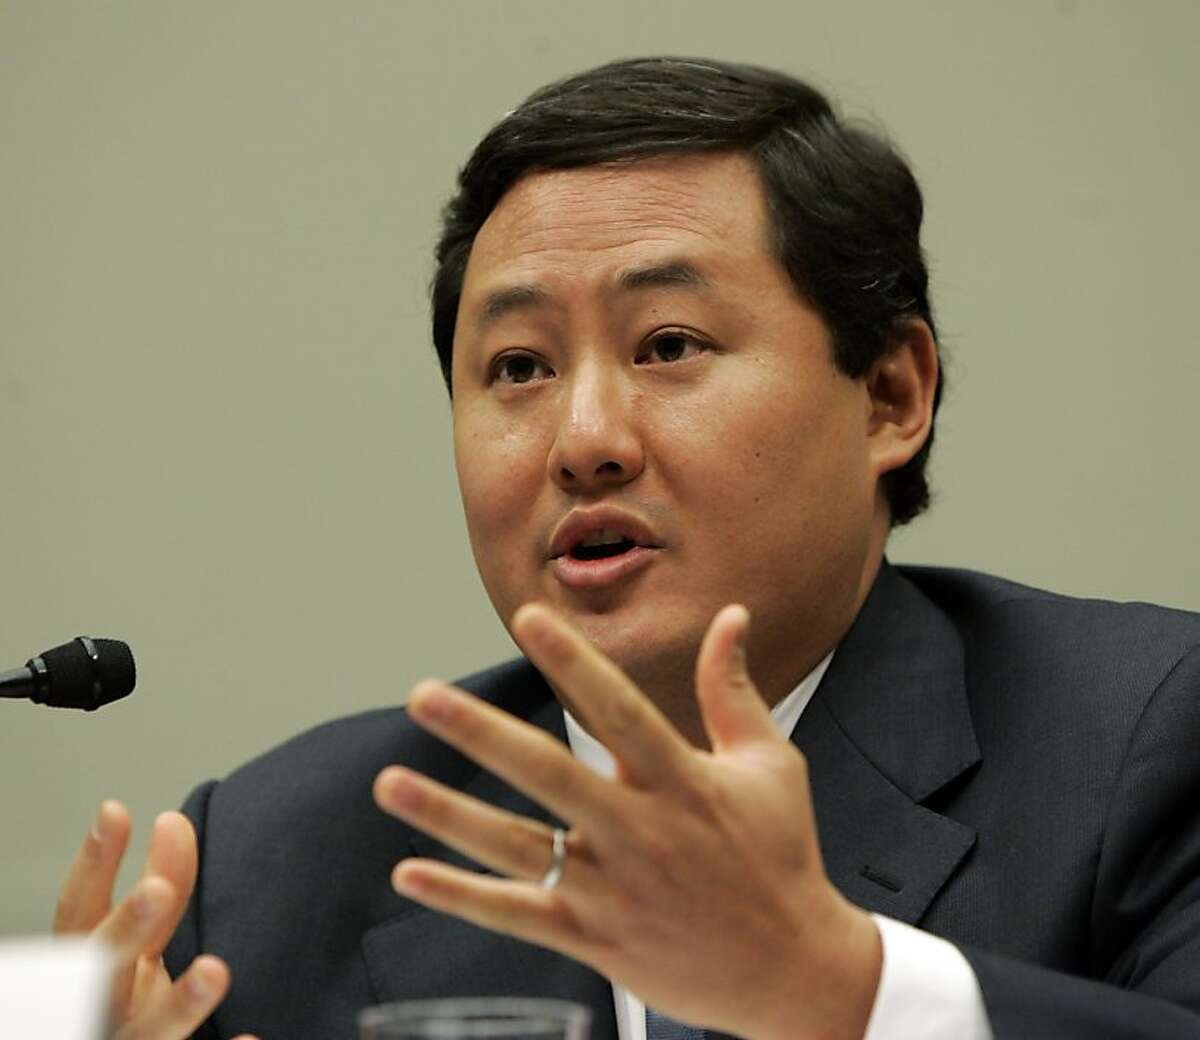 In this June 26, 2008 file photo John Yoo, a law professor at the University of California at Berkeley, testifies on Capitol Hill in Washington. Justice Department officials have stopped short of recommending criminal charges against Bush administration lawyers who wrote secret memos approving harsh interrogation techniques of terror suspects. (AP Photo/Susan Walsh, File)